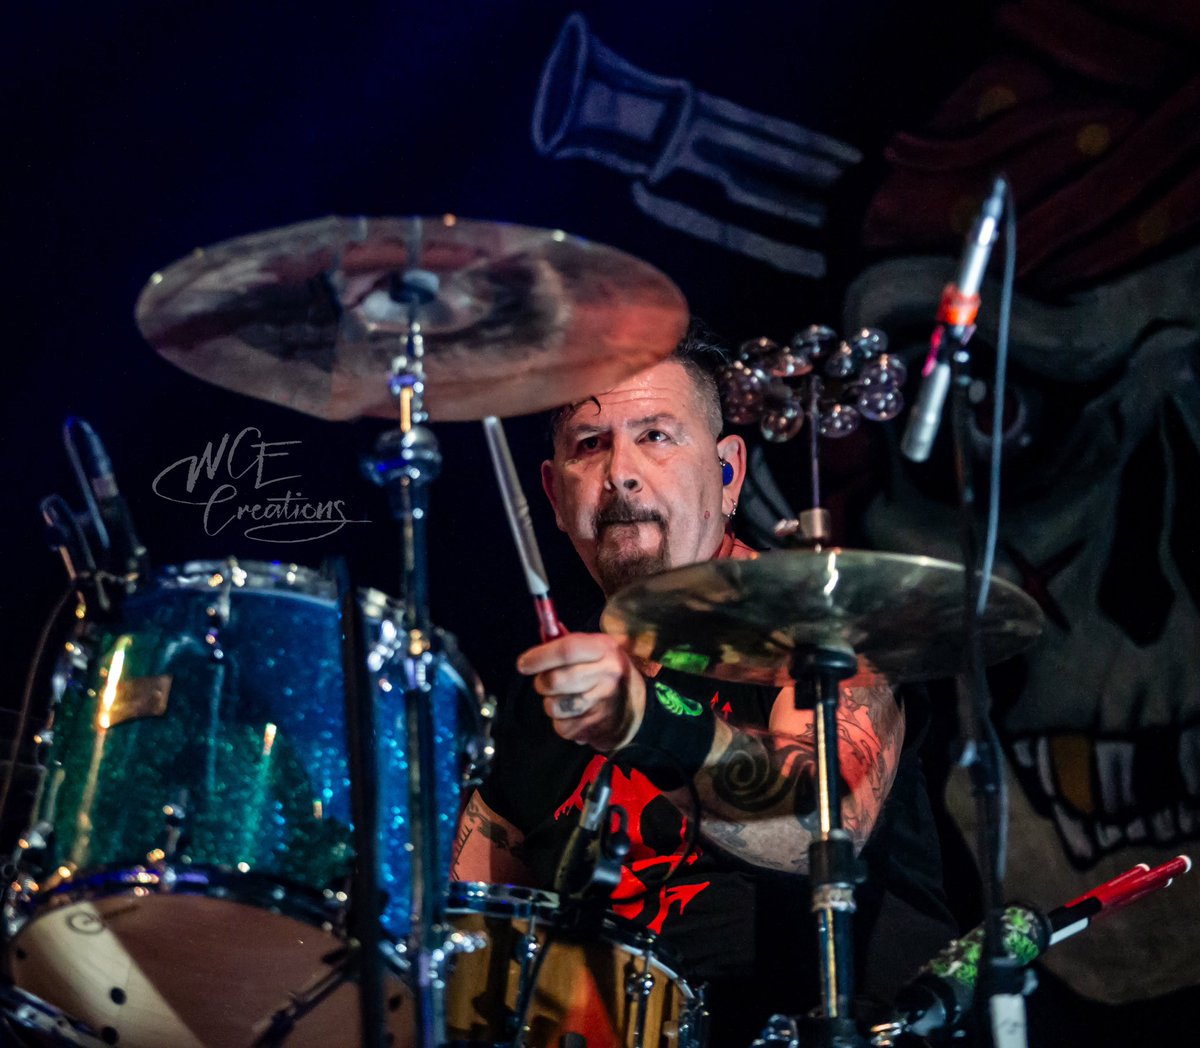 Since I’ve technically posted a pic of everyone else from yesterday, can’t forget about @sduncandrums 
#shawnduncan #laguns #drummer  #myphoto #wcecreations #wordscantexplain #canonphotography #concertphotography #livemusic #rocknroll #gigphotography #bandphotography @laguns